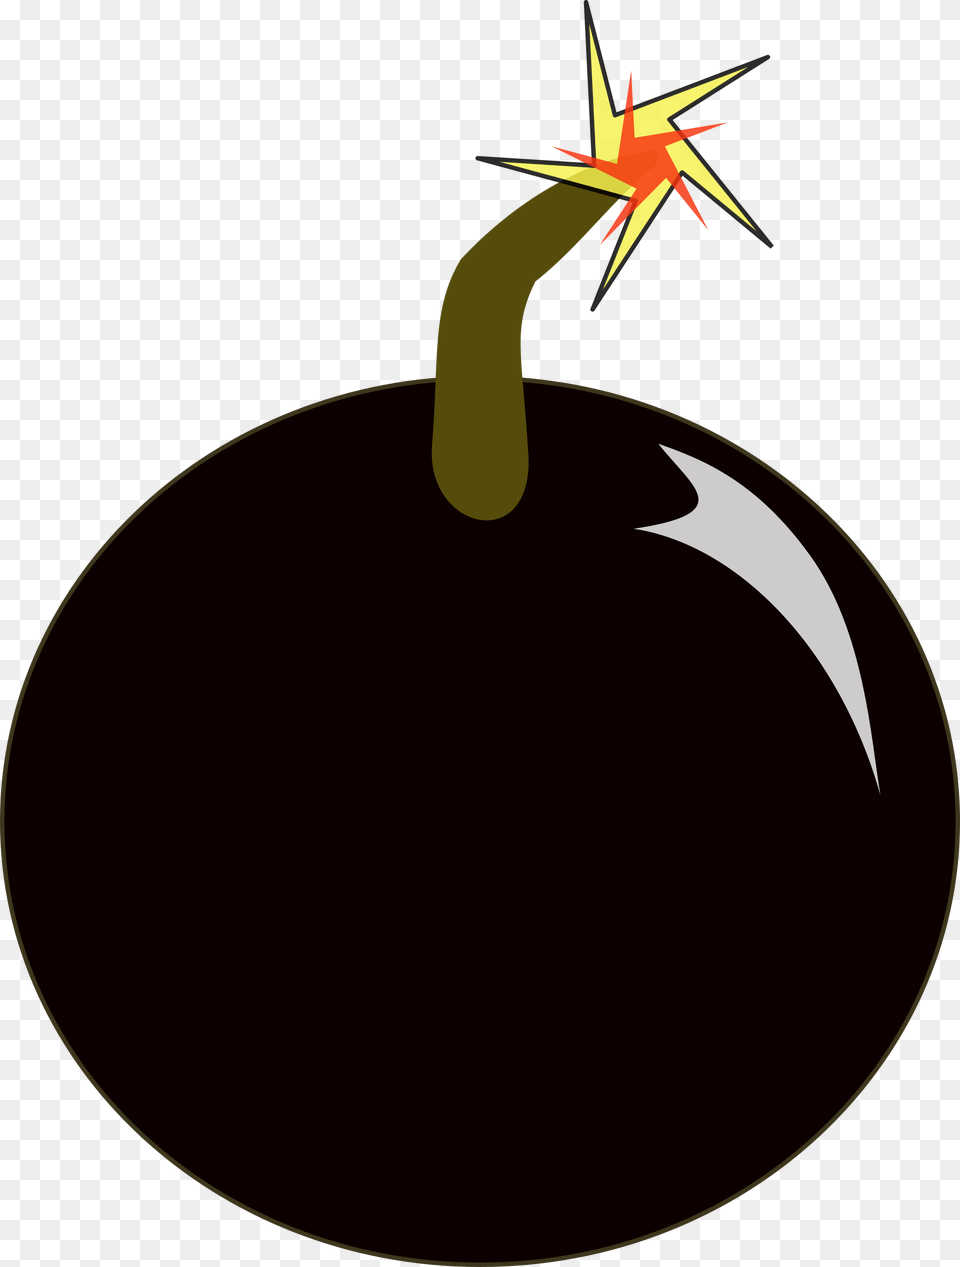 Bomb, Ammunition, Weapon Free Png